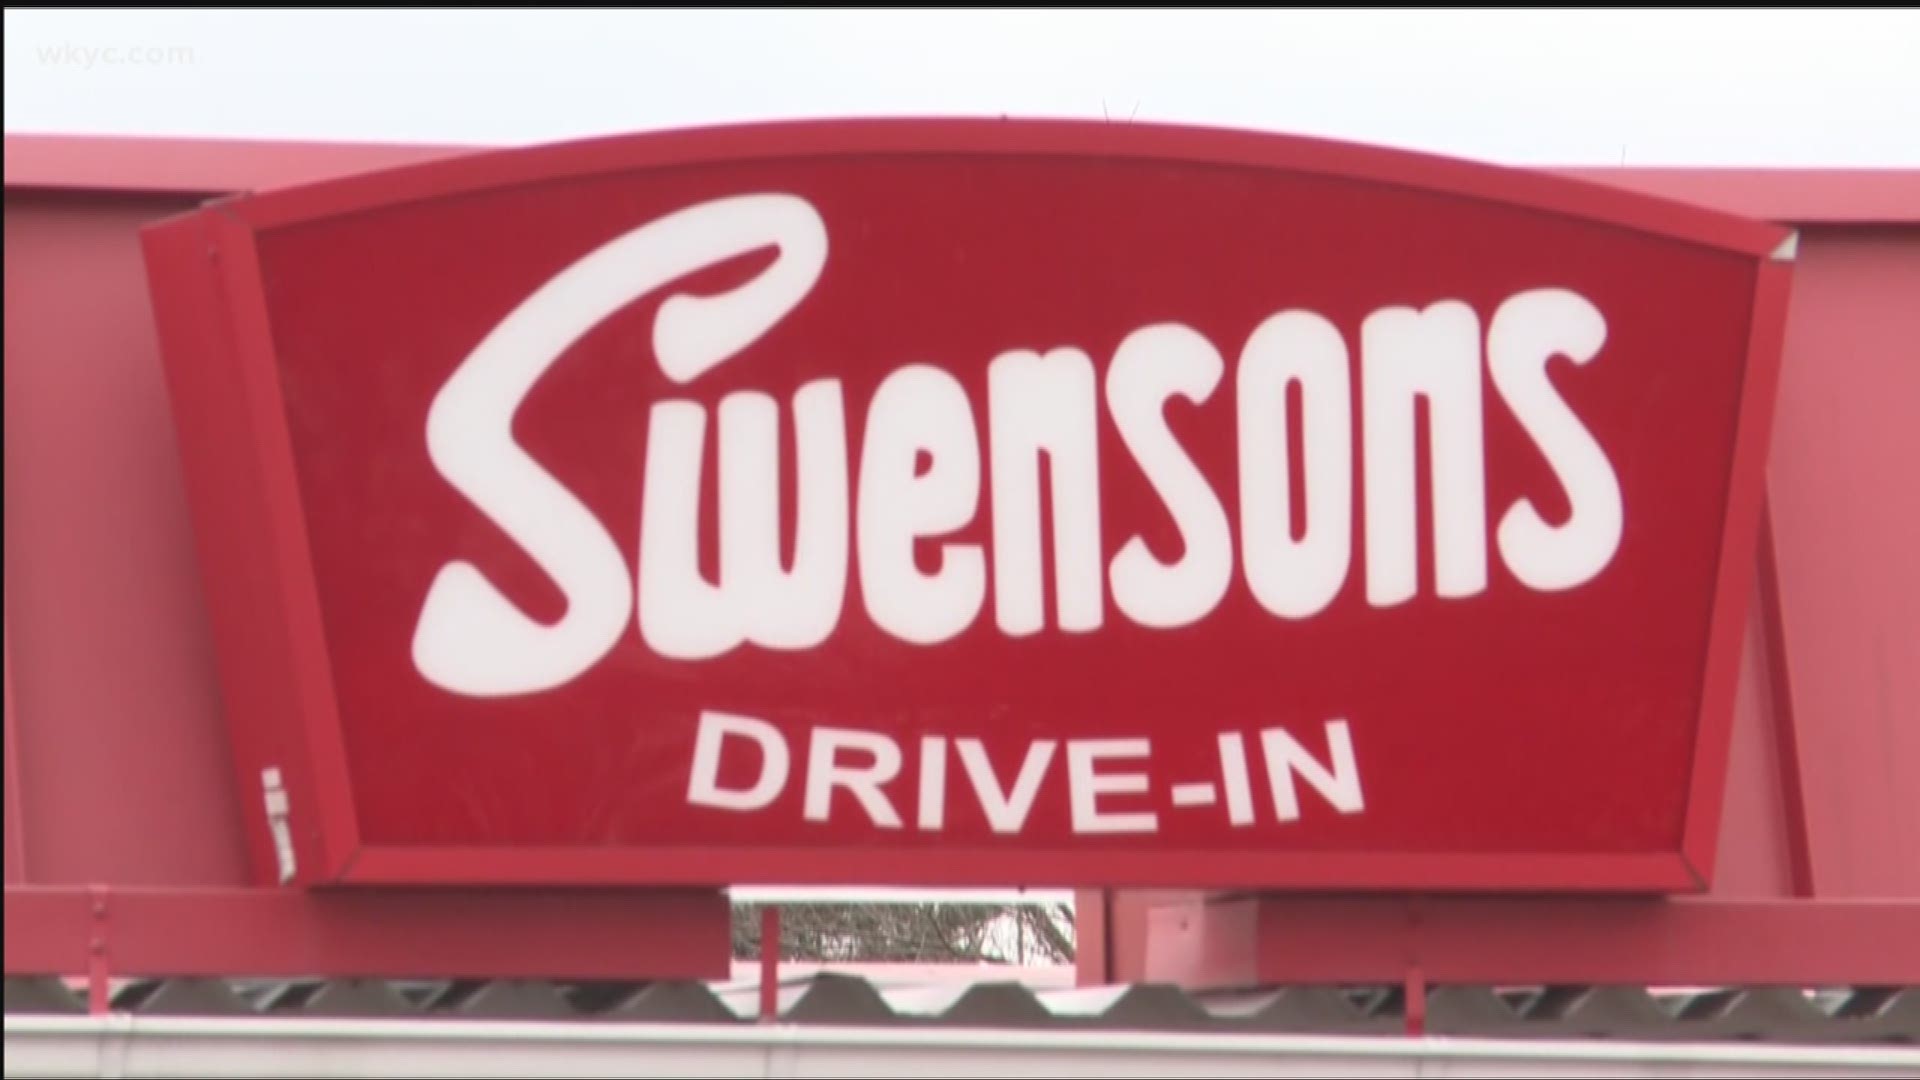 How to get free Swensons?